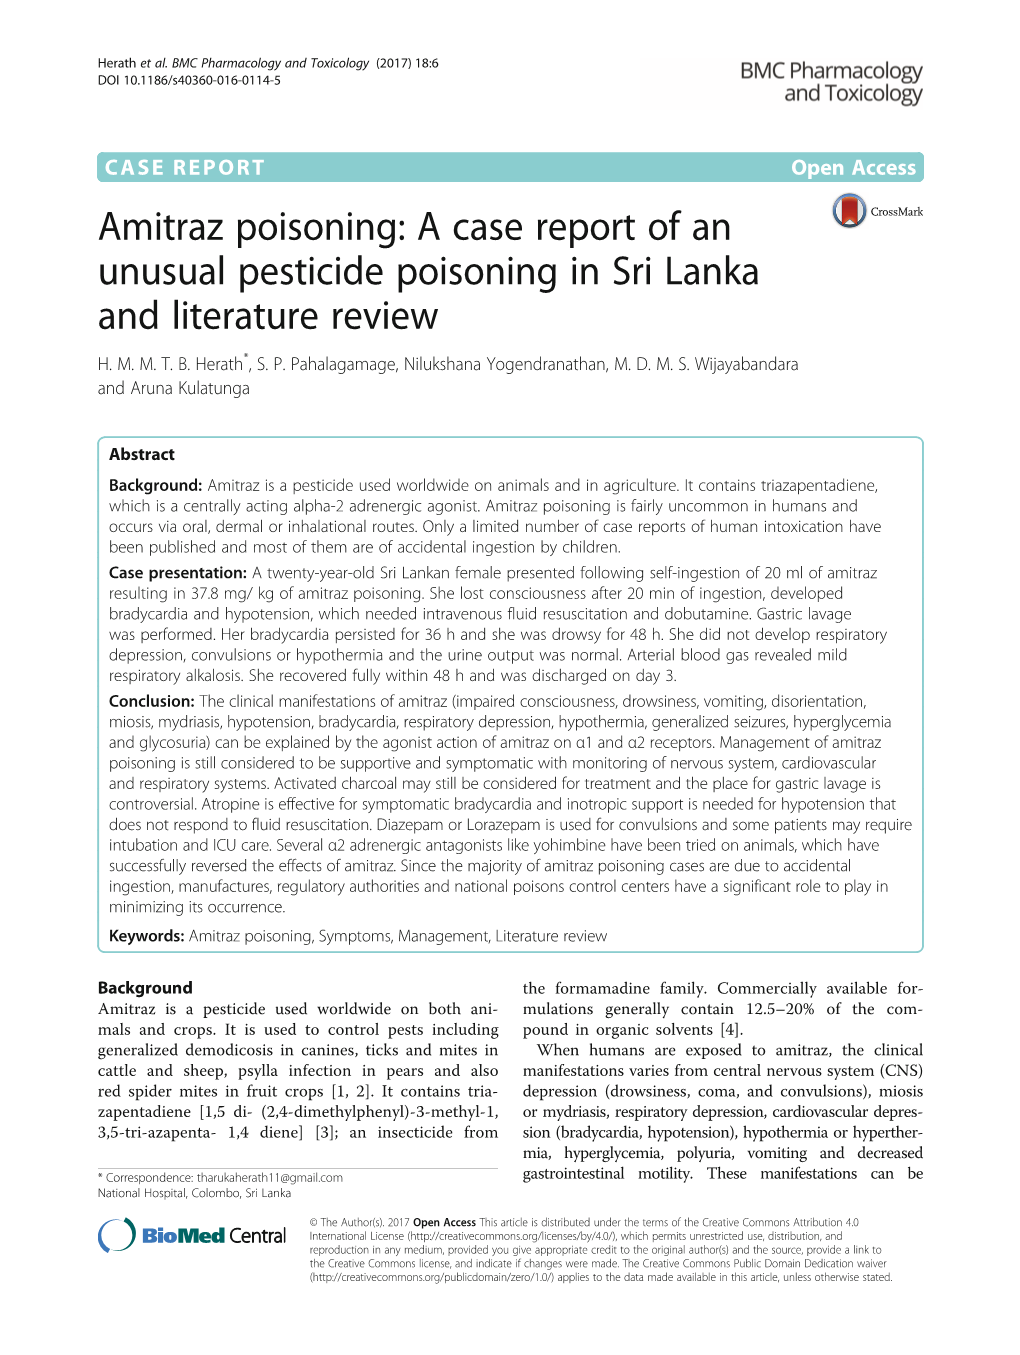 Amitraz Poisoning: a Case Report of an Unusual Pesticide Poisoning in Sri Lanka and Literature Review H